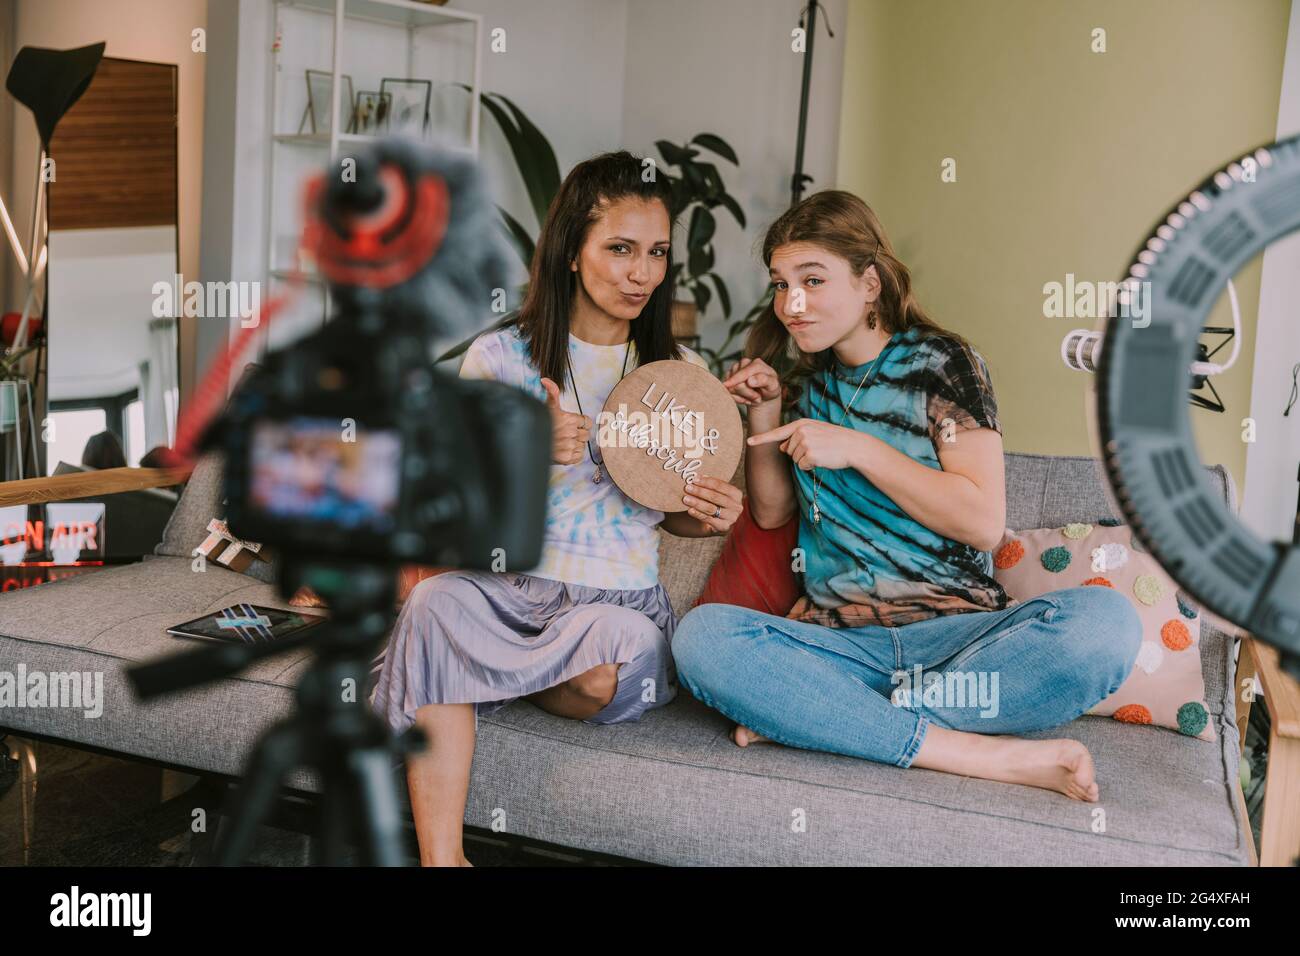 Women showing like and subscribe sign while vlogging at home Stock Photo